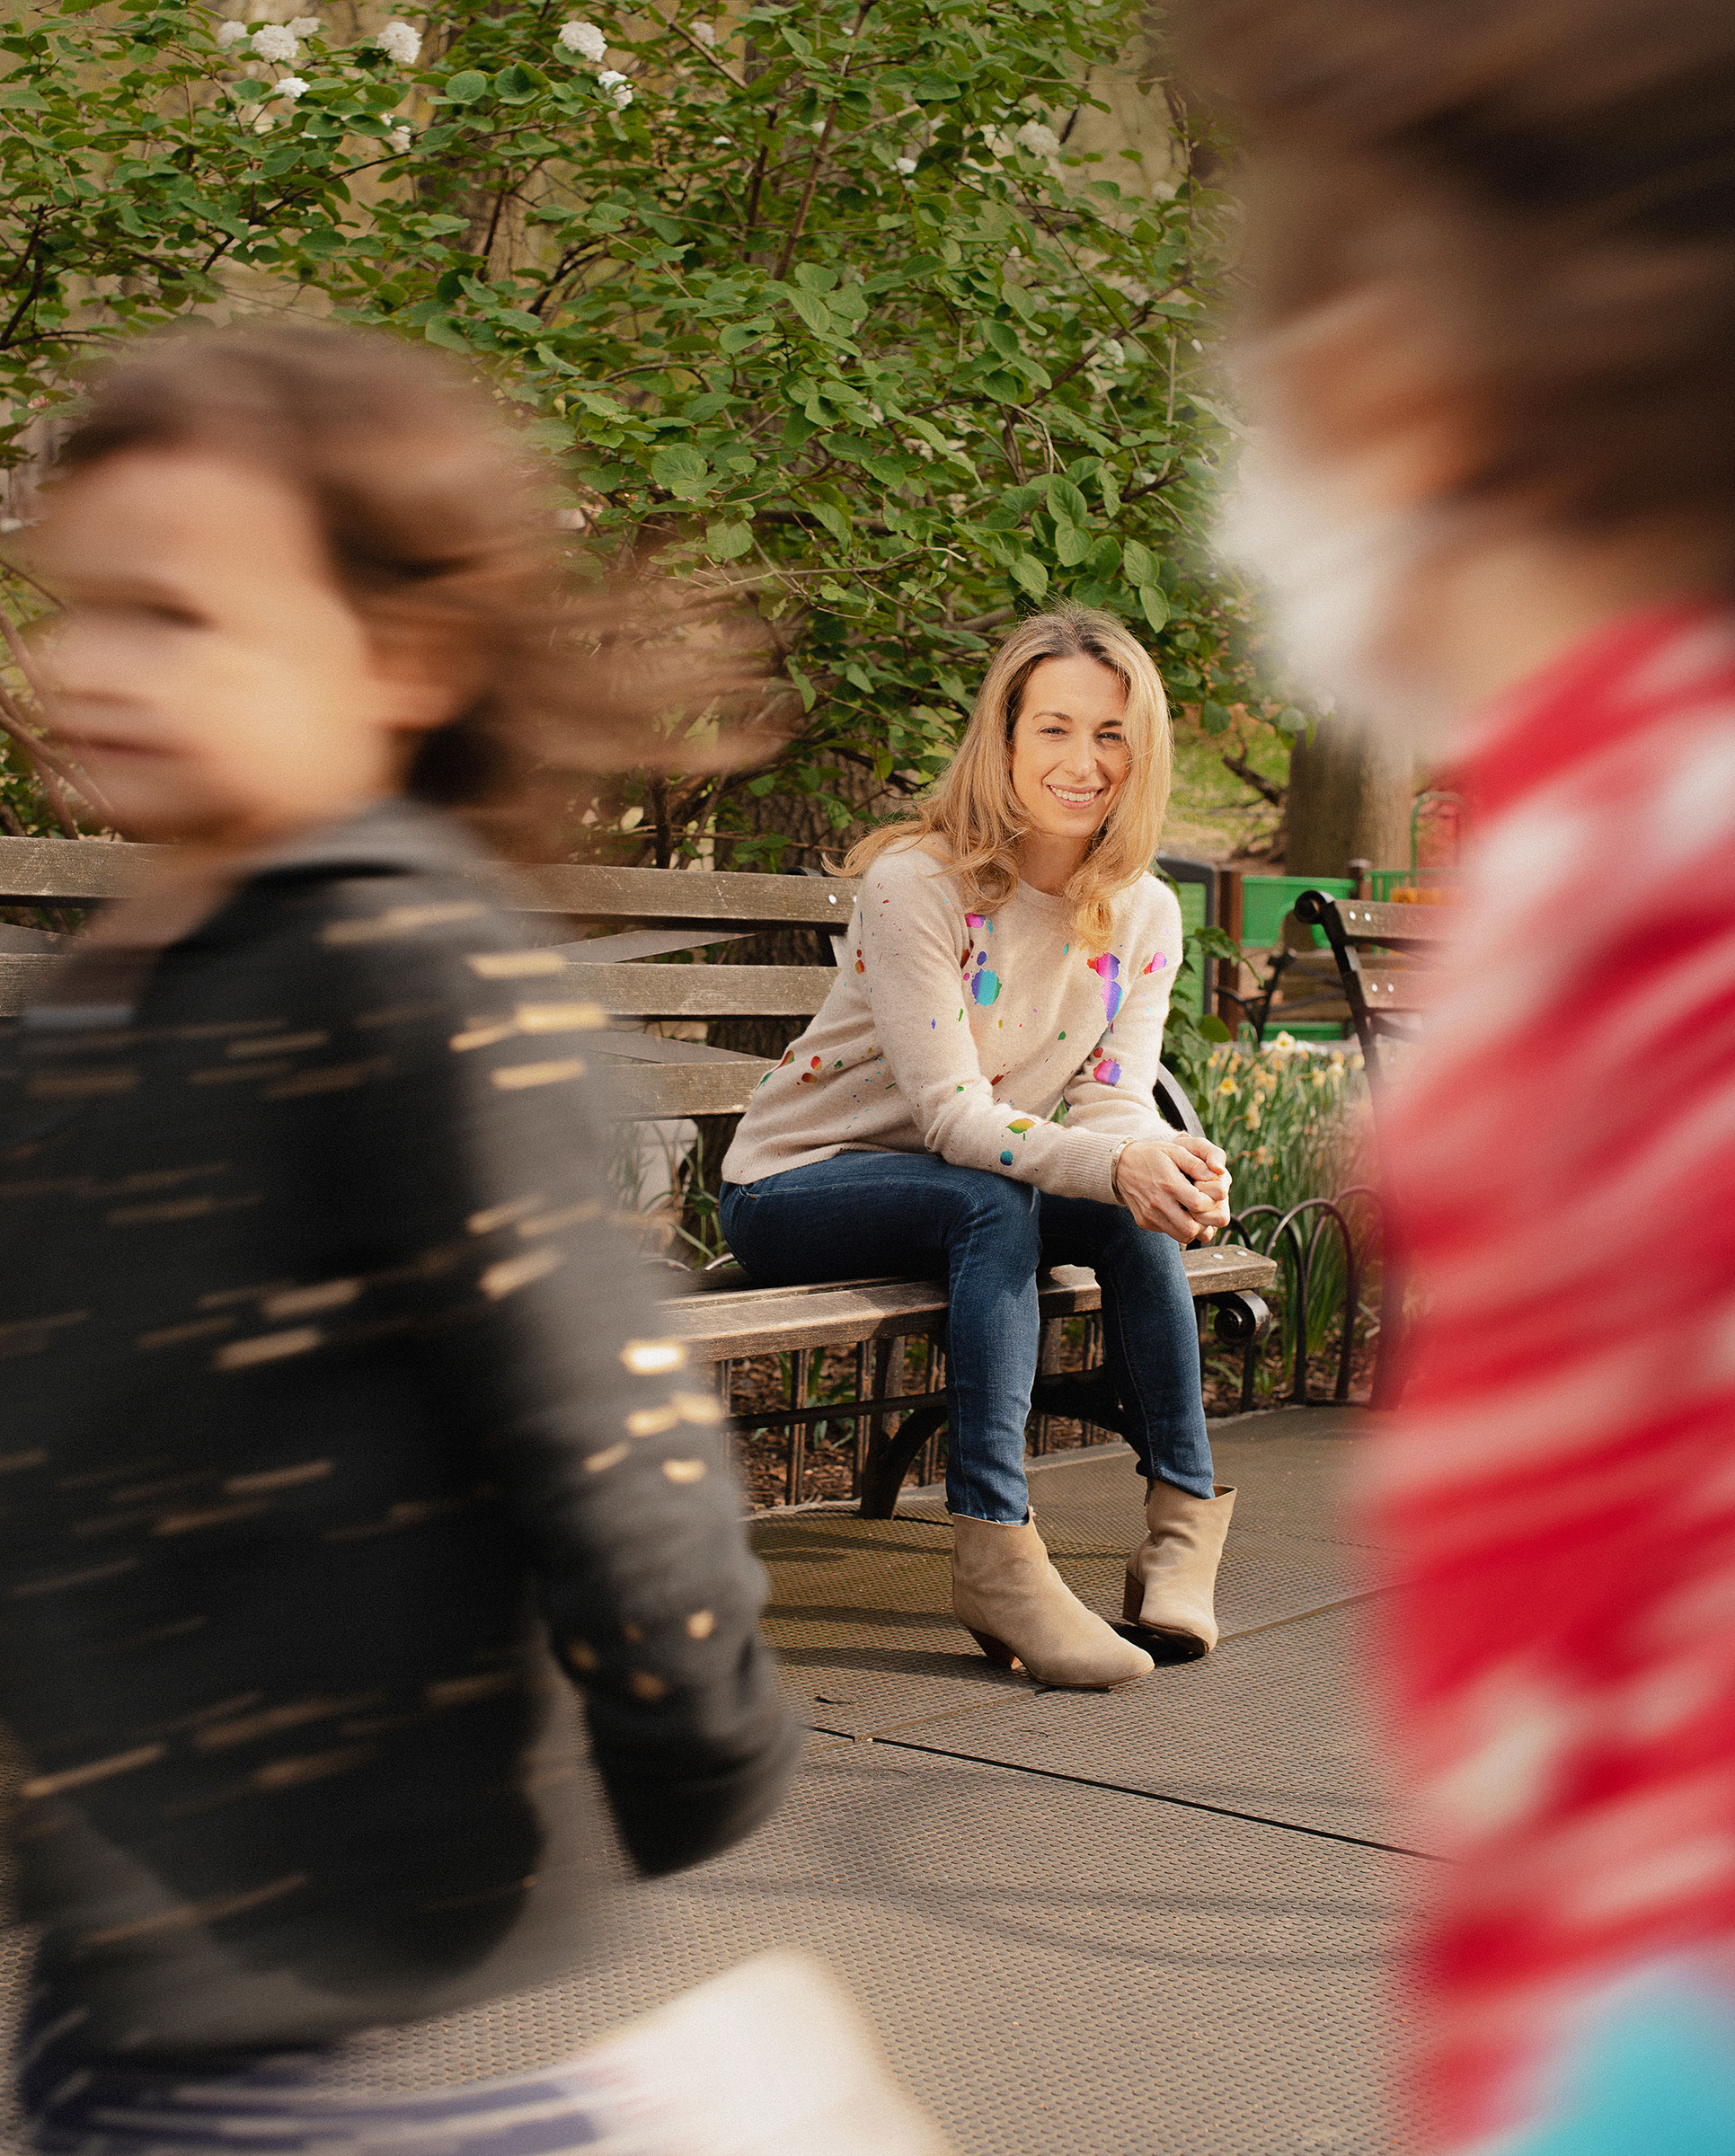 <strong>Becky Kennedy</strong>, pictured on Manhattan’s Upper West Side. "<a href="https://time.com/6075434/dr-becky-millennial-parenting/">How Dr. Becky Became the Millennial Parenting Whisperer</a>," July 5 issue. (Tonje Thilesen for TIME)